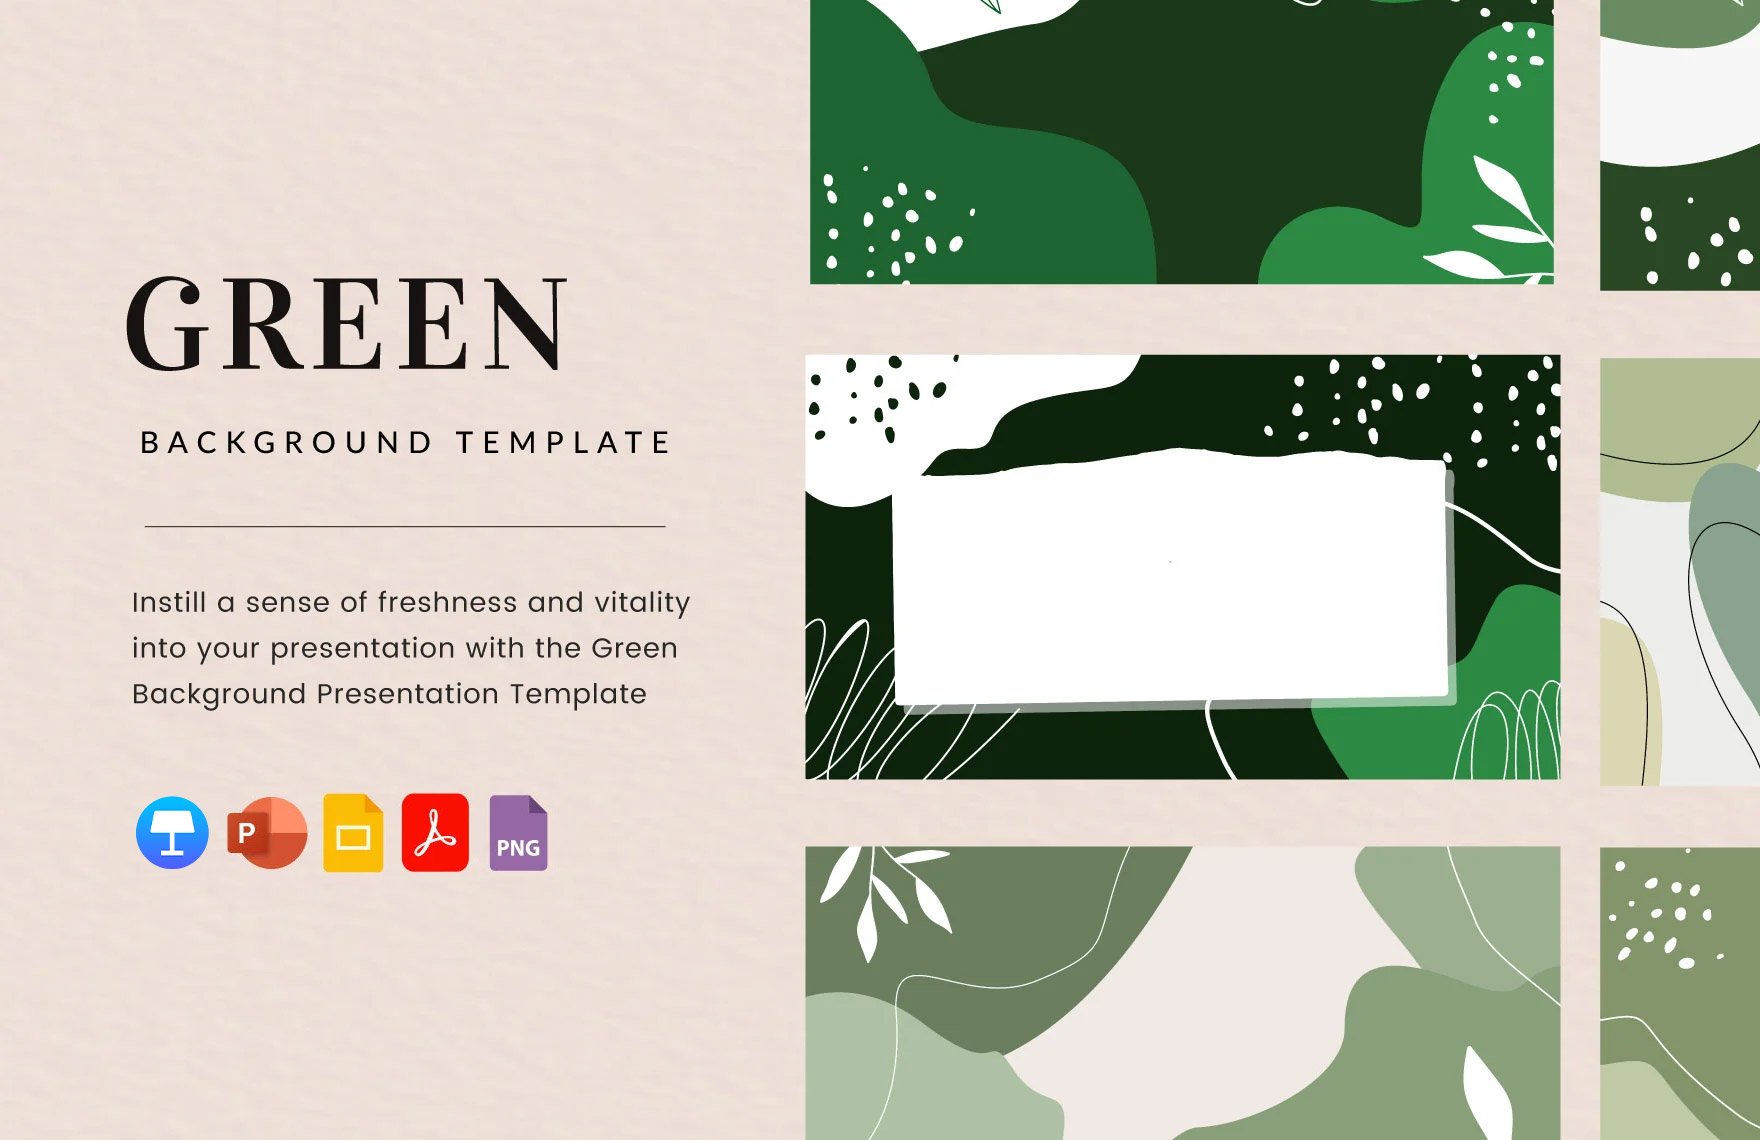 Green Background Template in PDF, PowerPoint, Google Slides, Apple Keynote, PNG